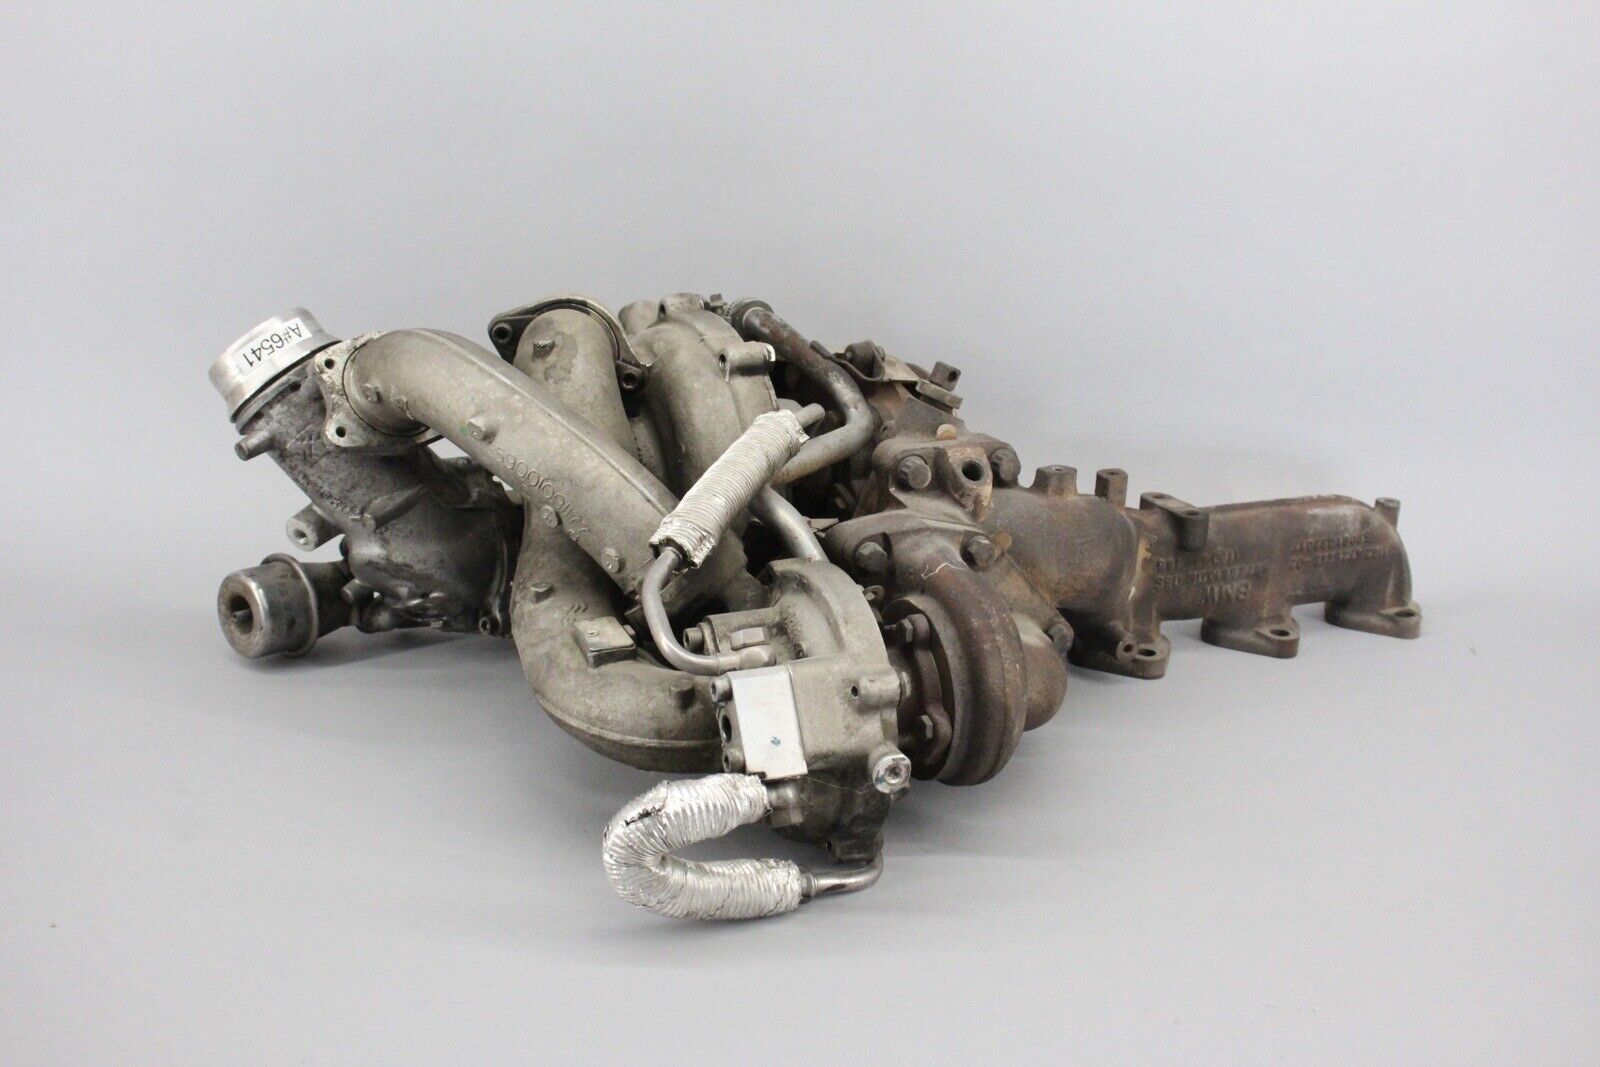 09-11 BMW E90 335d M57 Diesel Turbo Engine Turbocharger Exhaust Assembly OEM